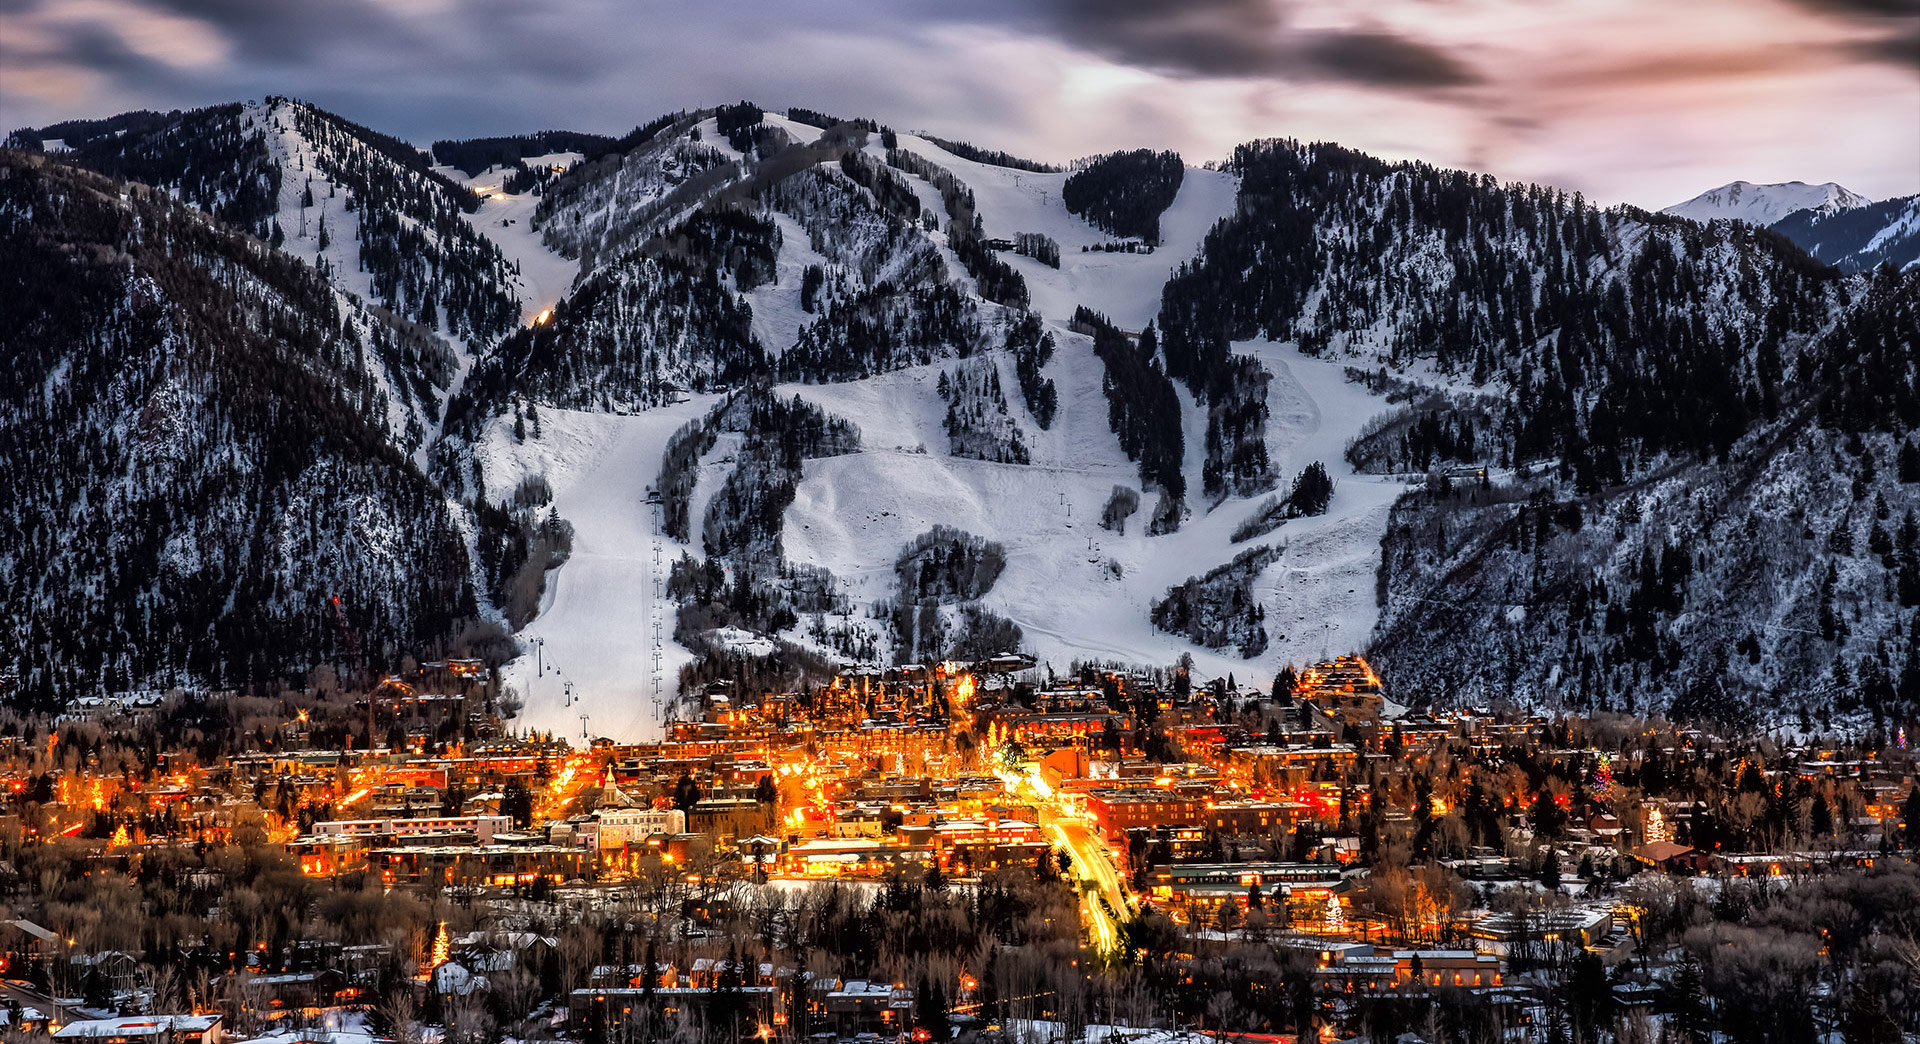 Sizer Image for Aspen at night with ski runs